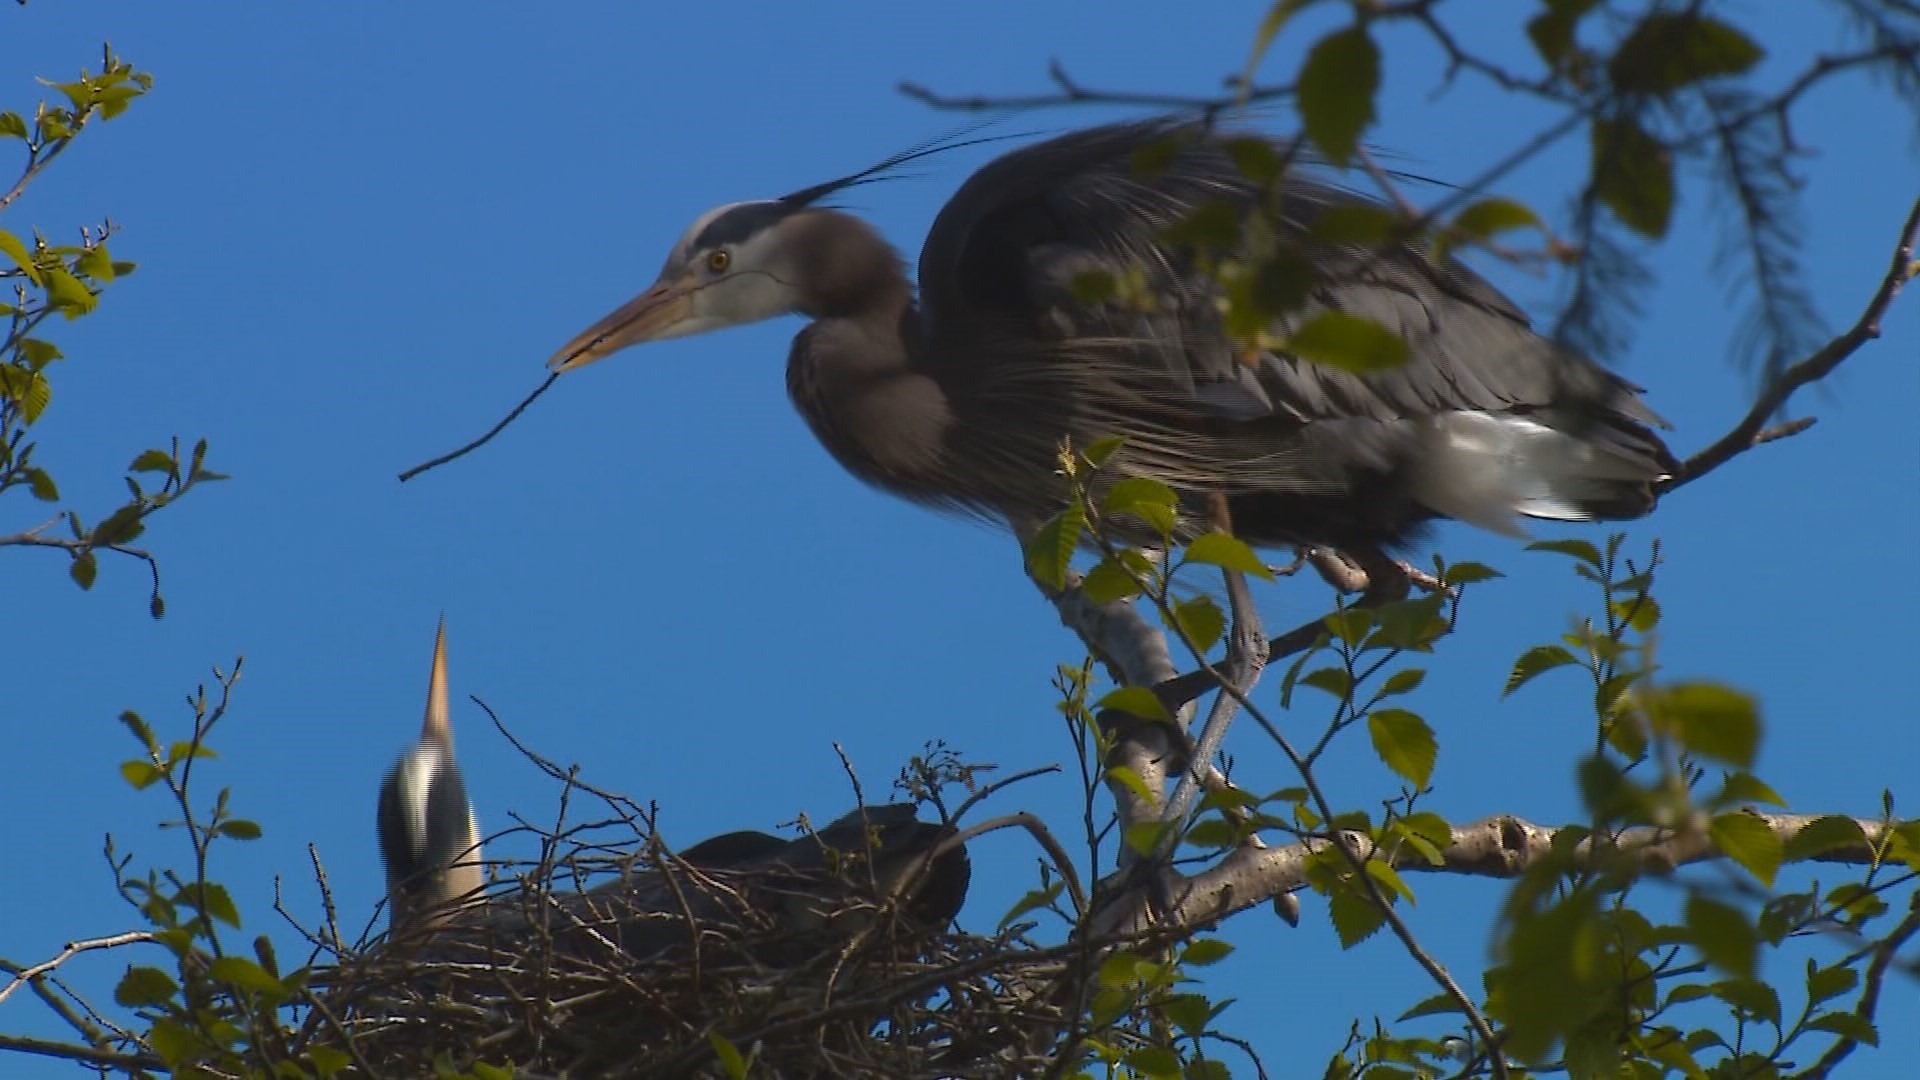 With six-foot wingspans, they weigh five pounds and are nothing but feathers and bones. #k5evening